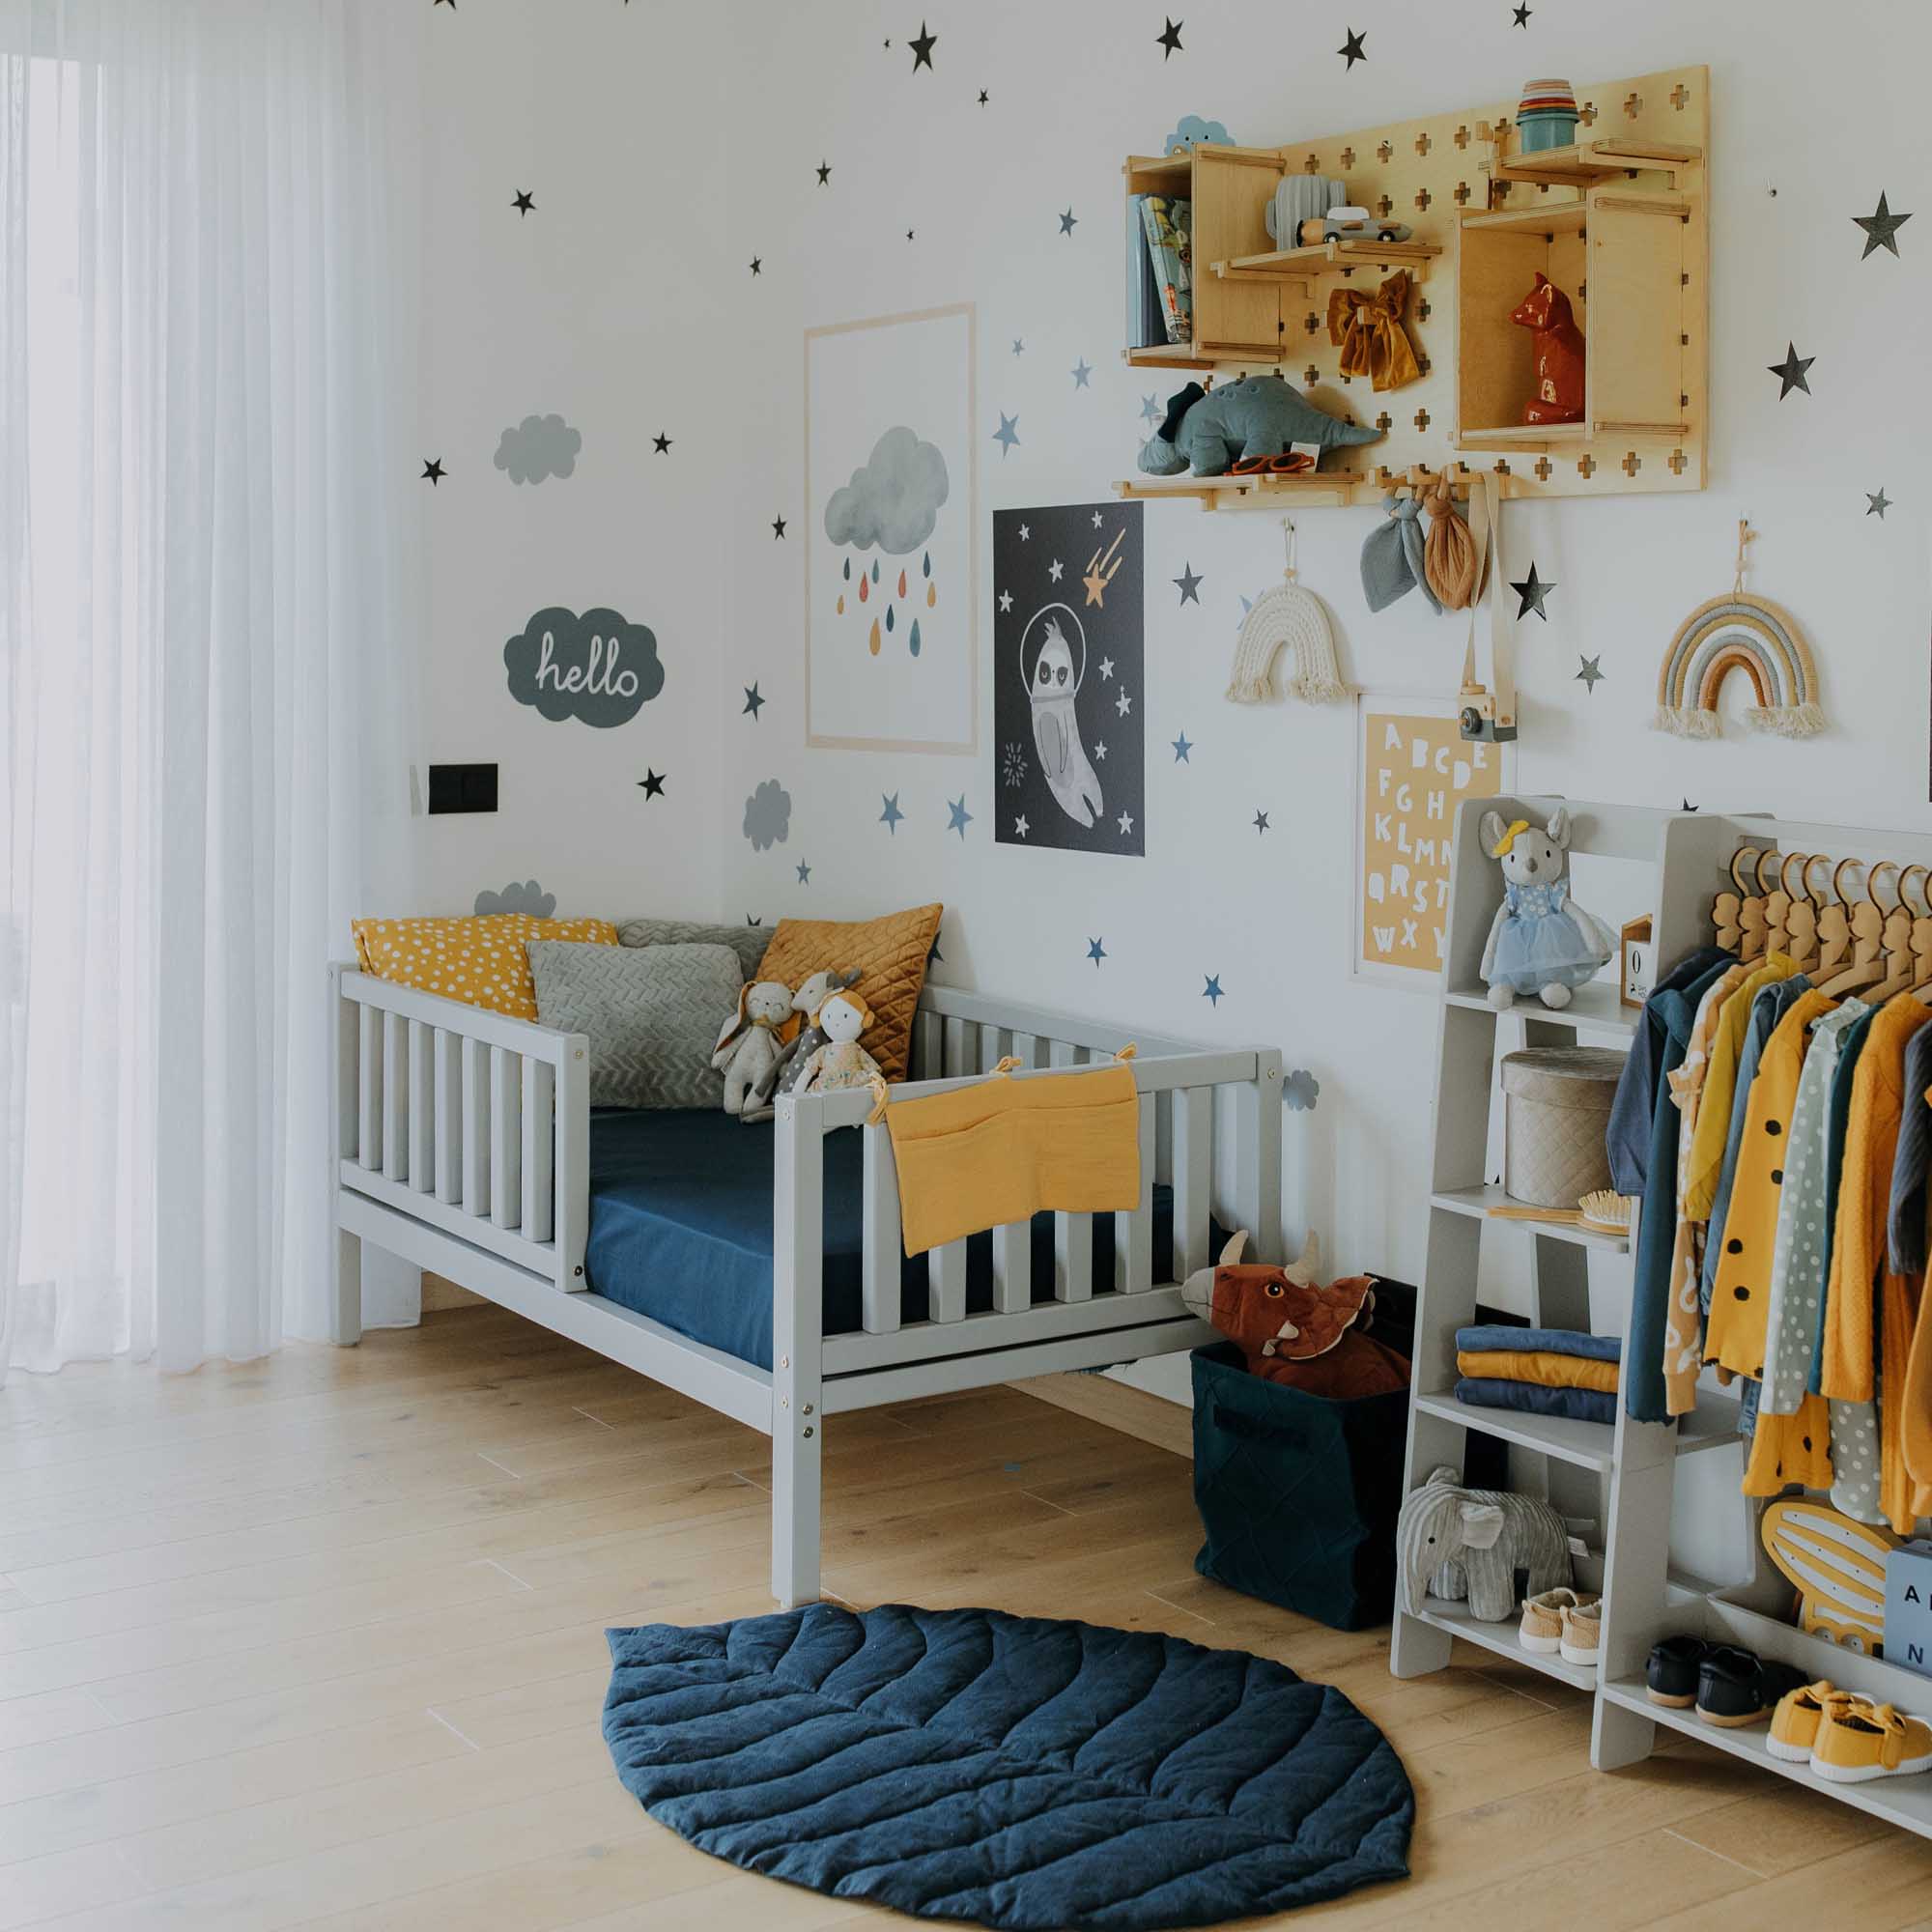 A child's room with a yellow and blue theme.